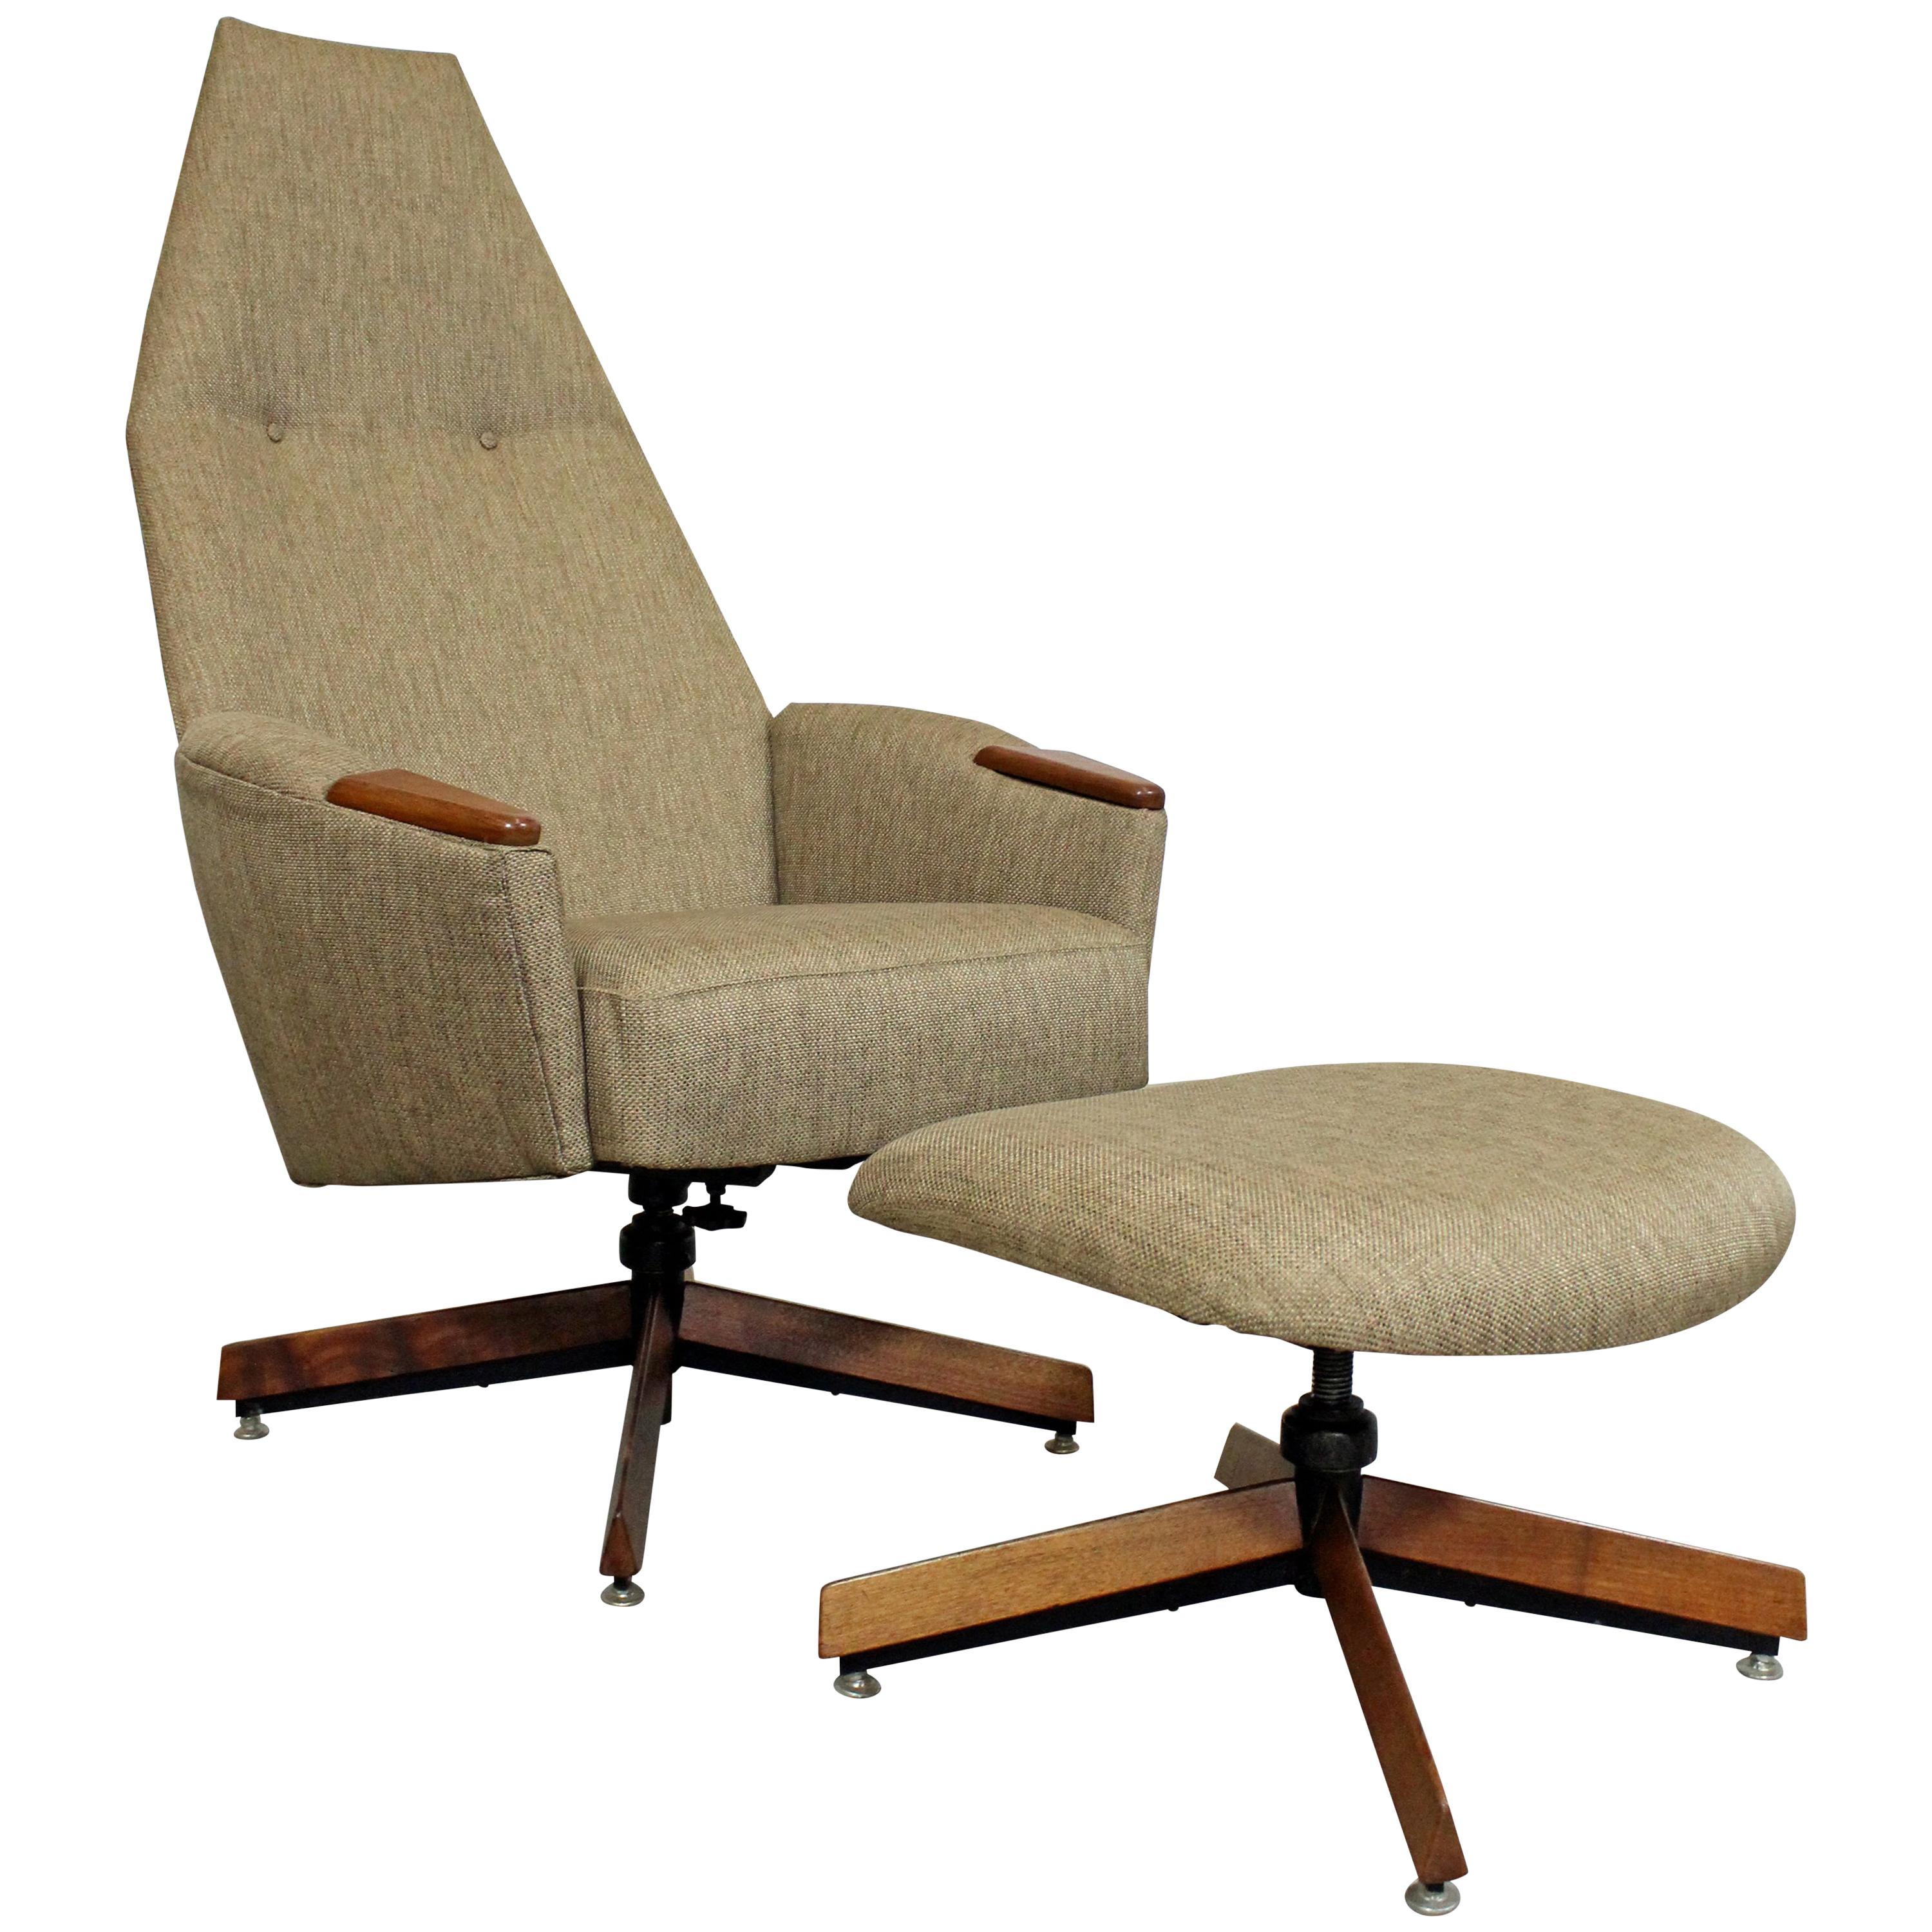 Mid-Century Modern Adrian Pearsall for Craft Assoc. Lounge Chair and Ottoman